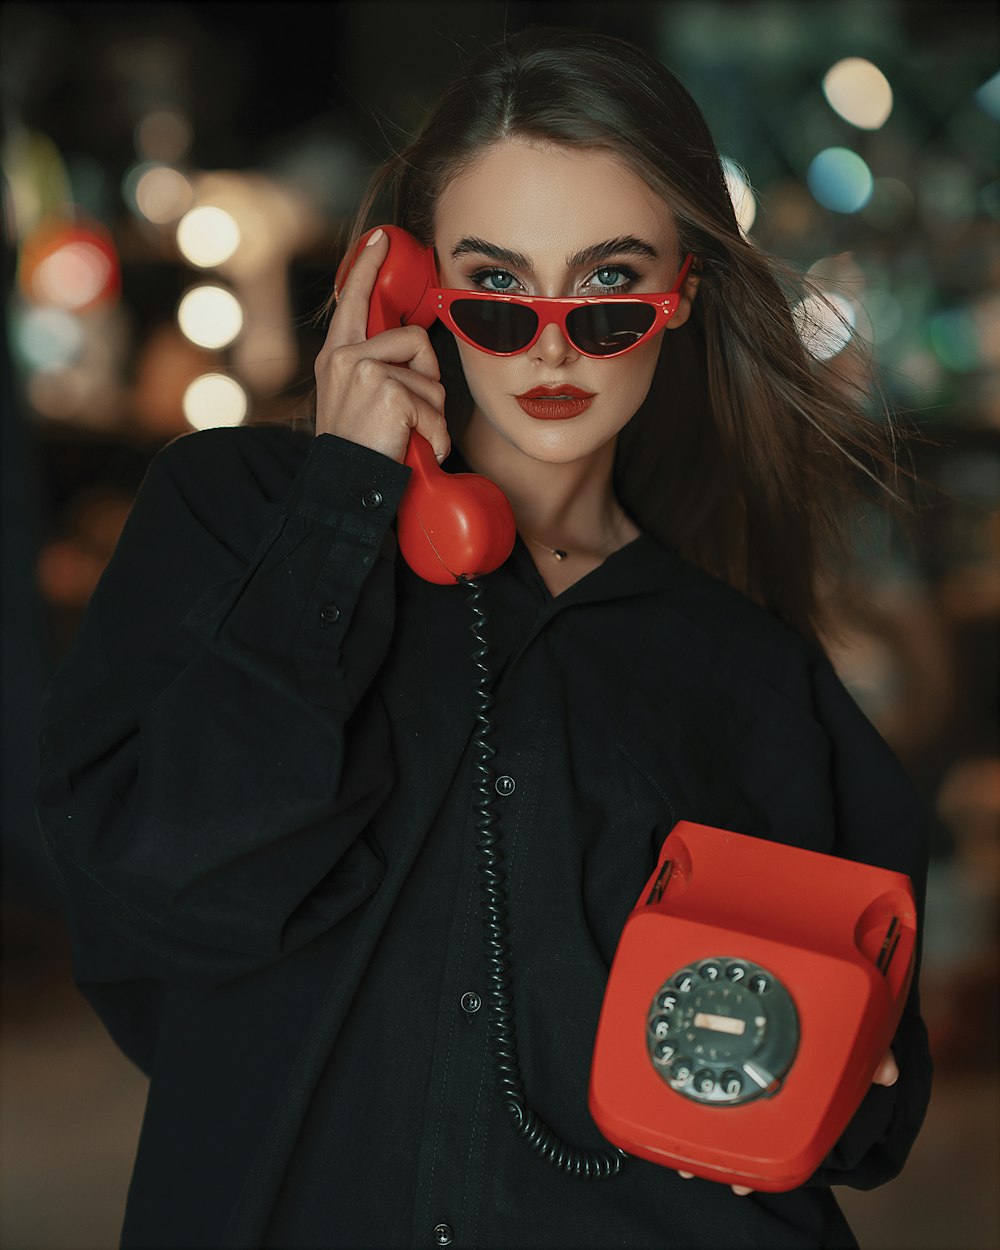 a woman wearing sunglasses and holding a red phone